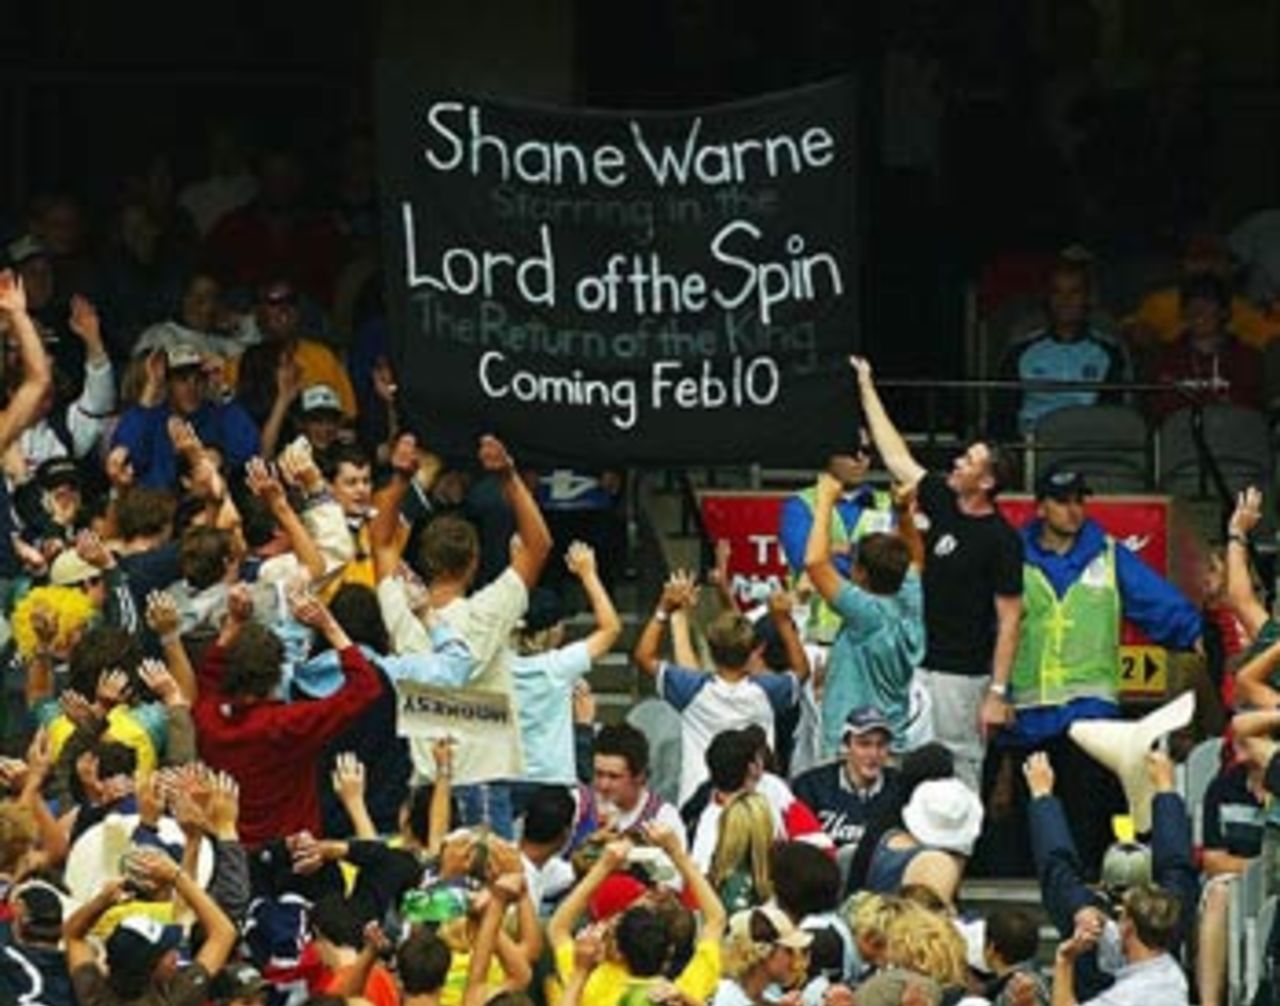 The rain ended the match as a contest, but fans still celebrated, eagerly awaiting the return of Shane Warne, Australia v Zimbabwe, 10th ODI, VB Series, Melbourne, January 29, 2004